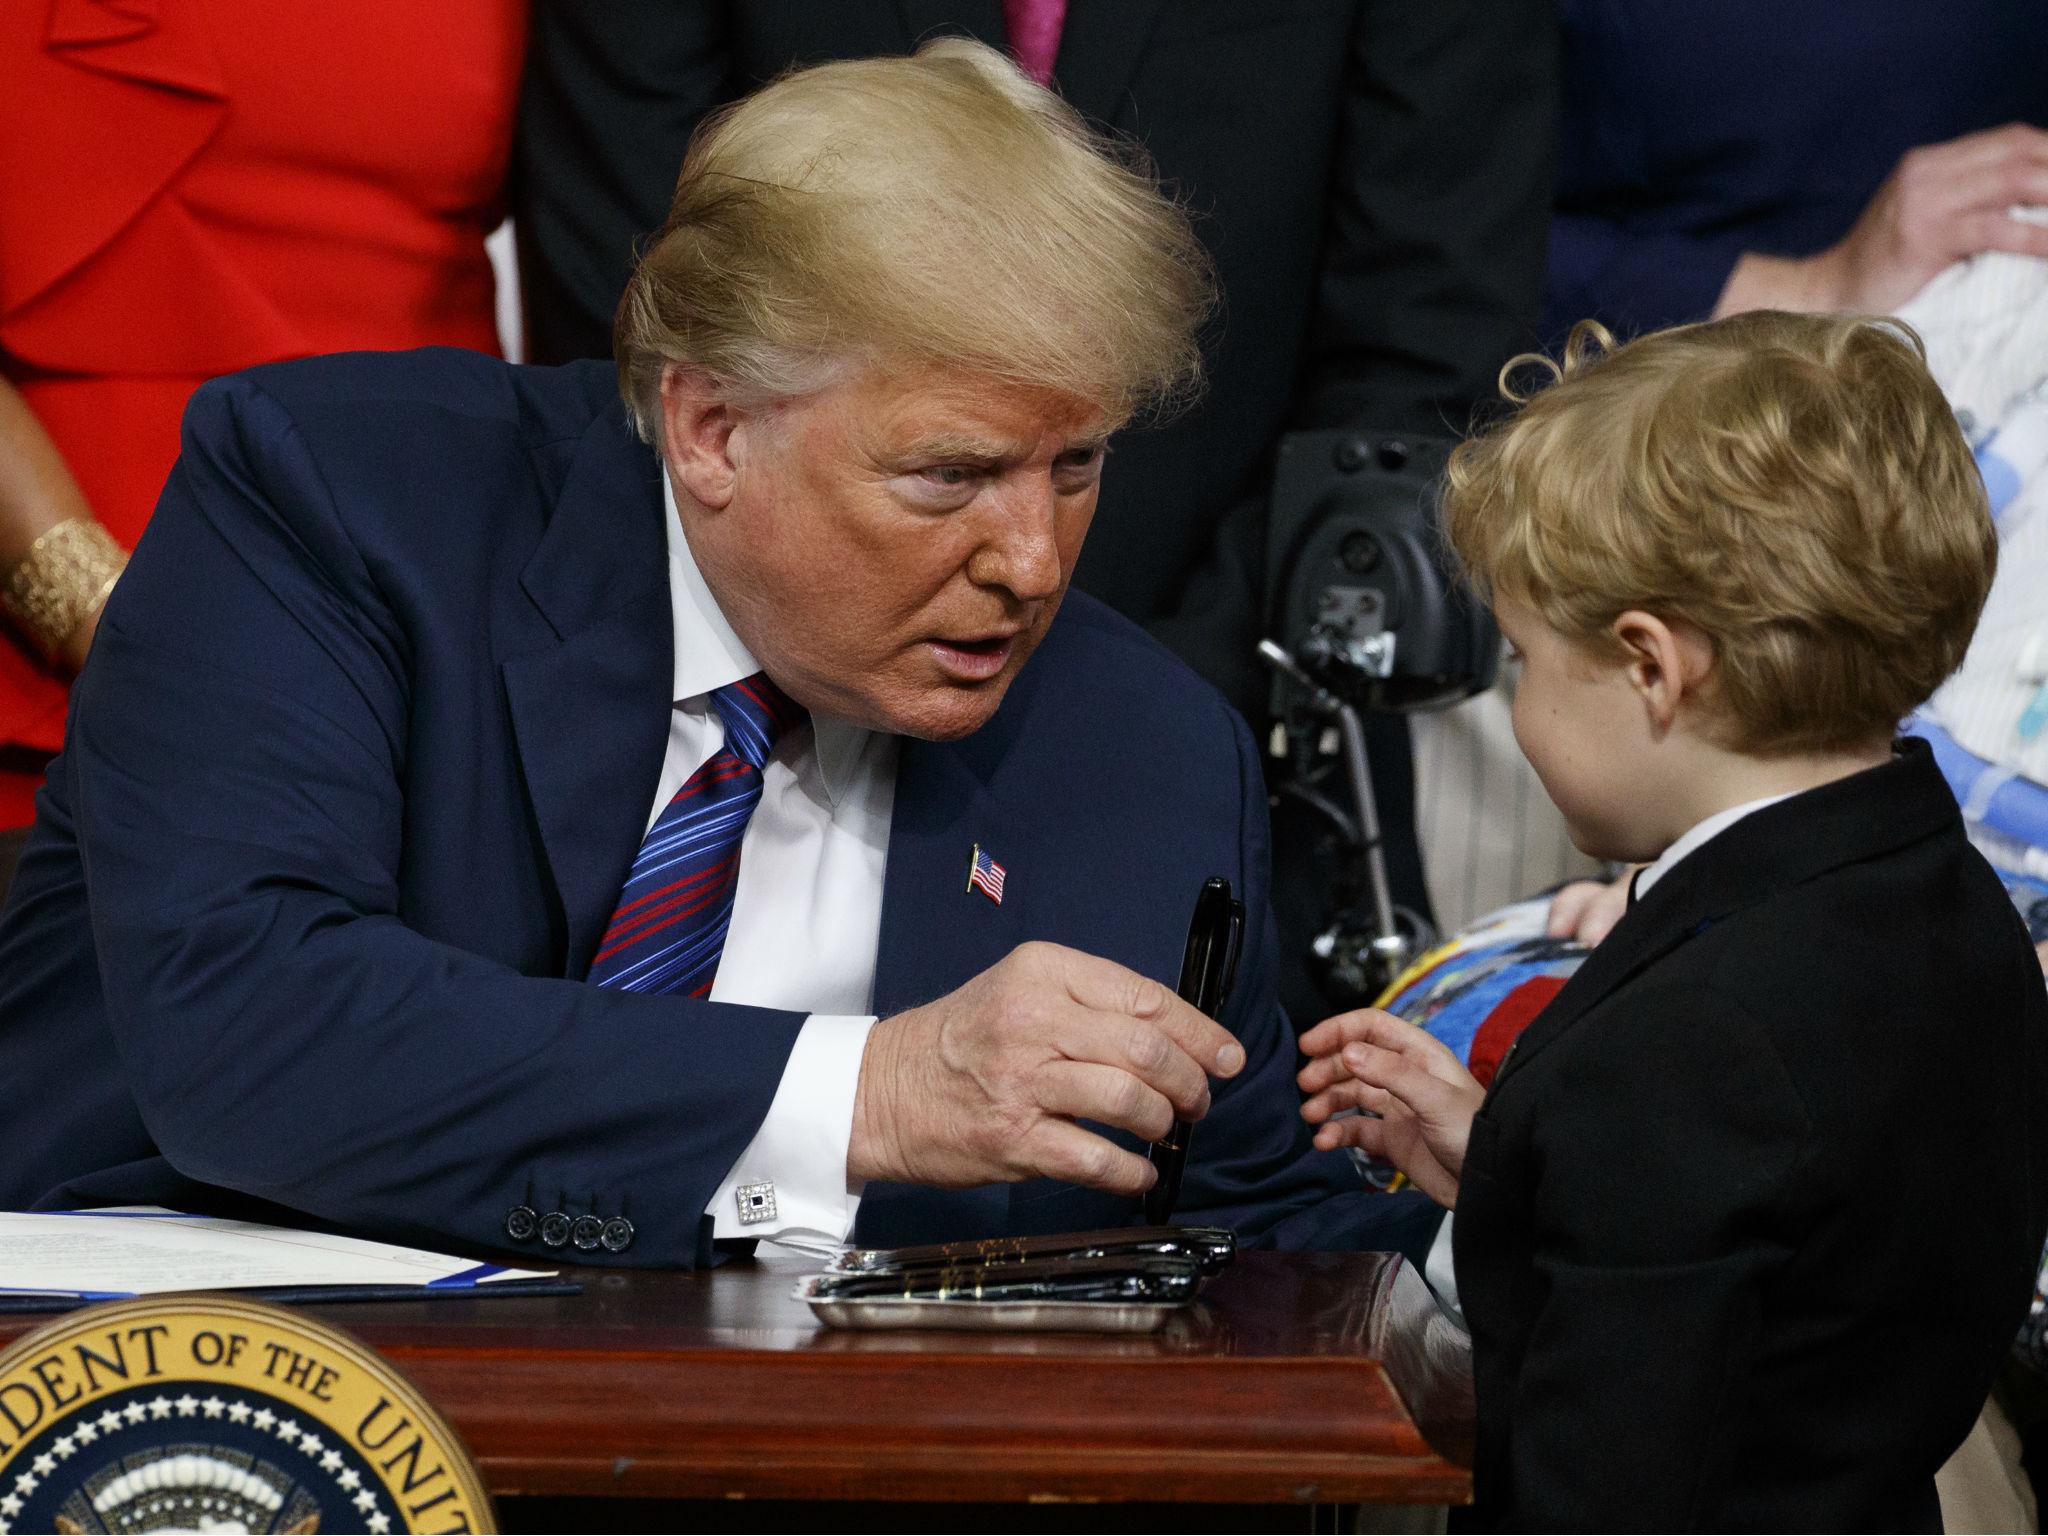 Mr Trump hands a pen to a child with muscular dystrophy after signing the right to try law